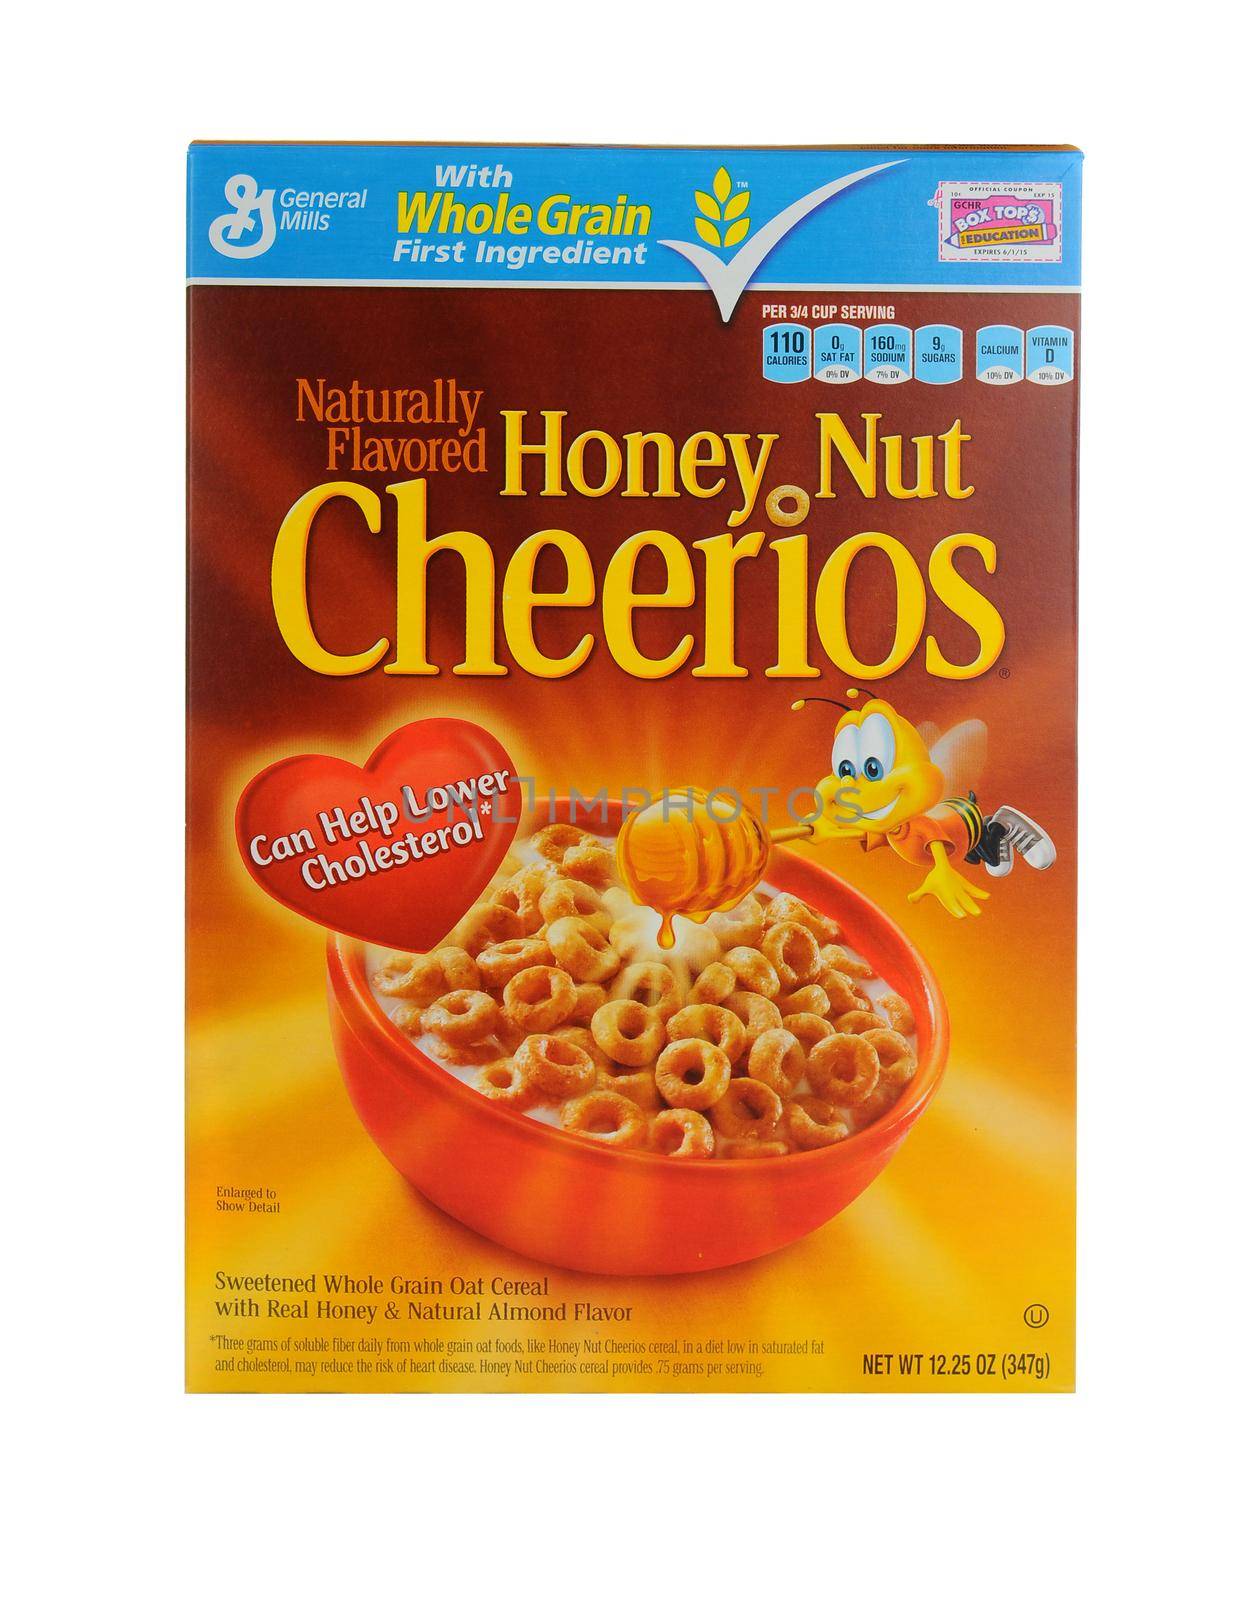 IRVINE, CA - January 11, 2013: A 12.25 oz box of Honey Nut Cheerios. Introduced in 1979 by General Mills it is a slightly sweeter version of the original Cheerios breakfast cereal.